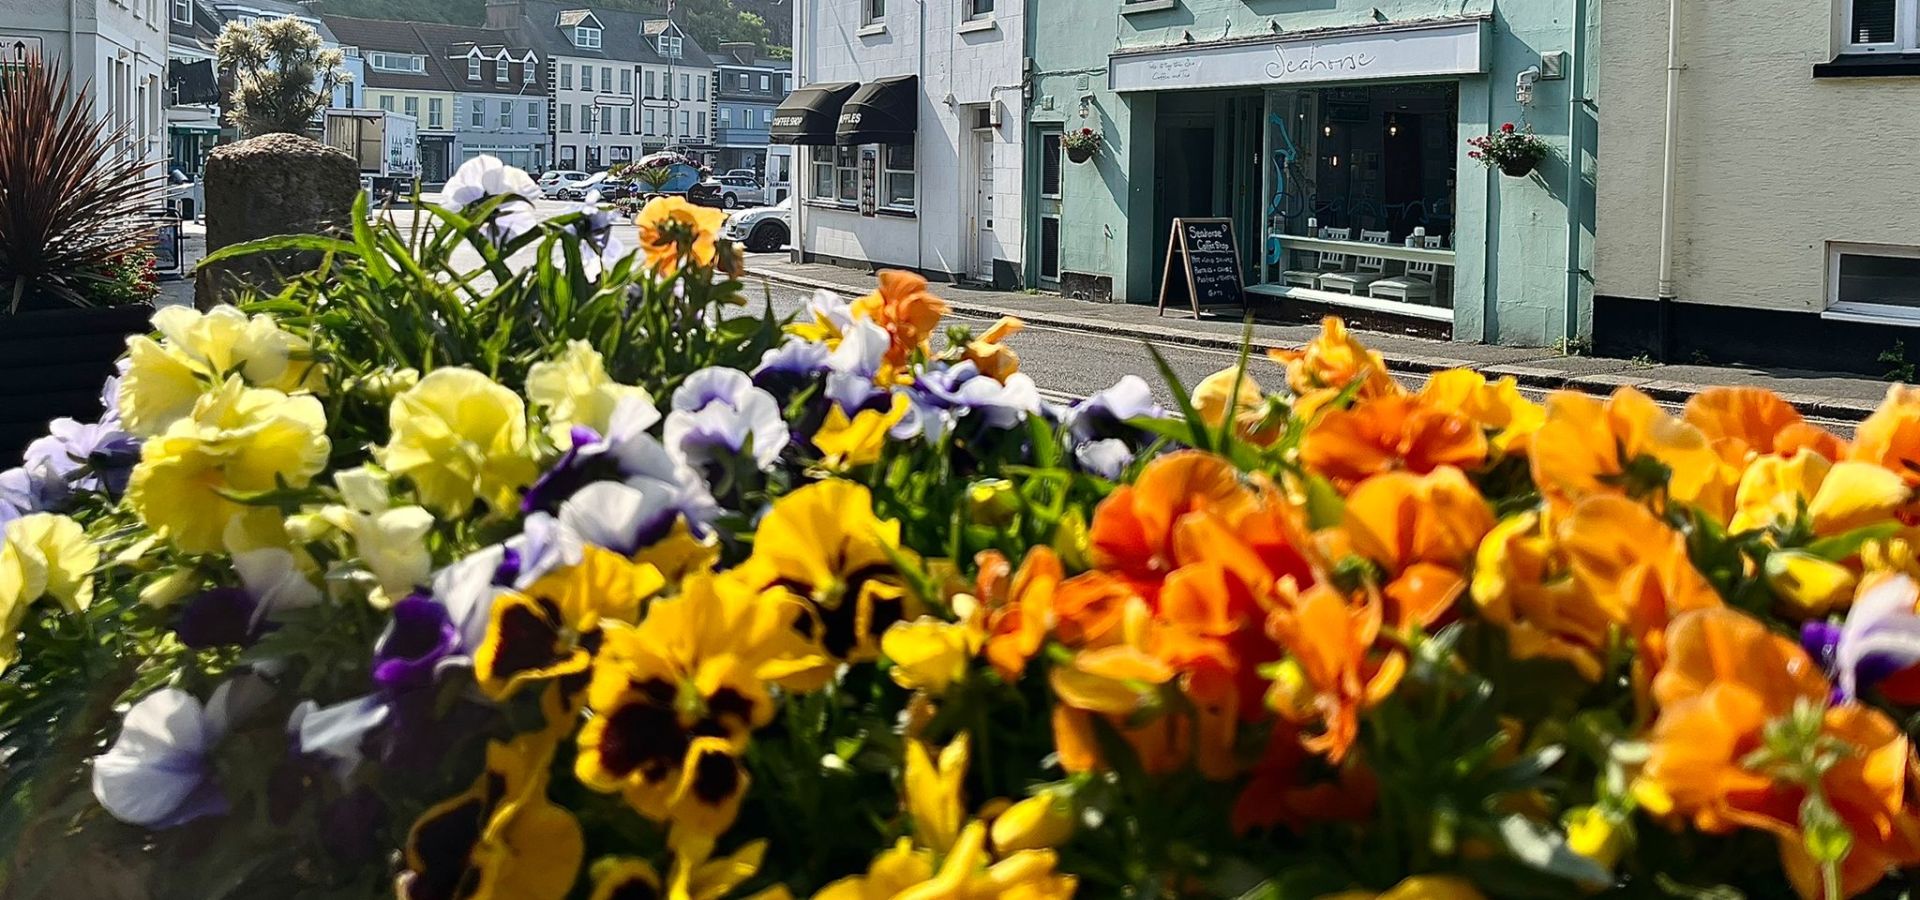 Colourful flowers in front of the green building that is the Seahorse coffee shop.